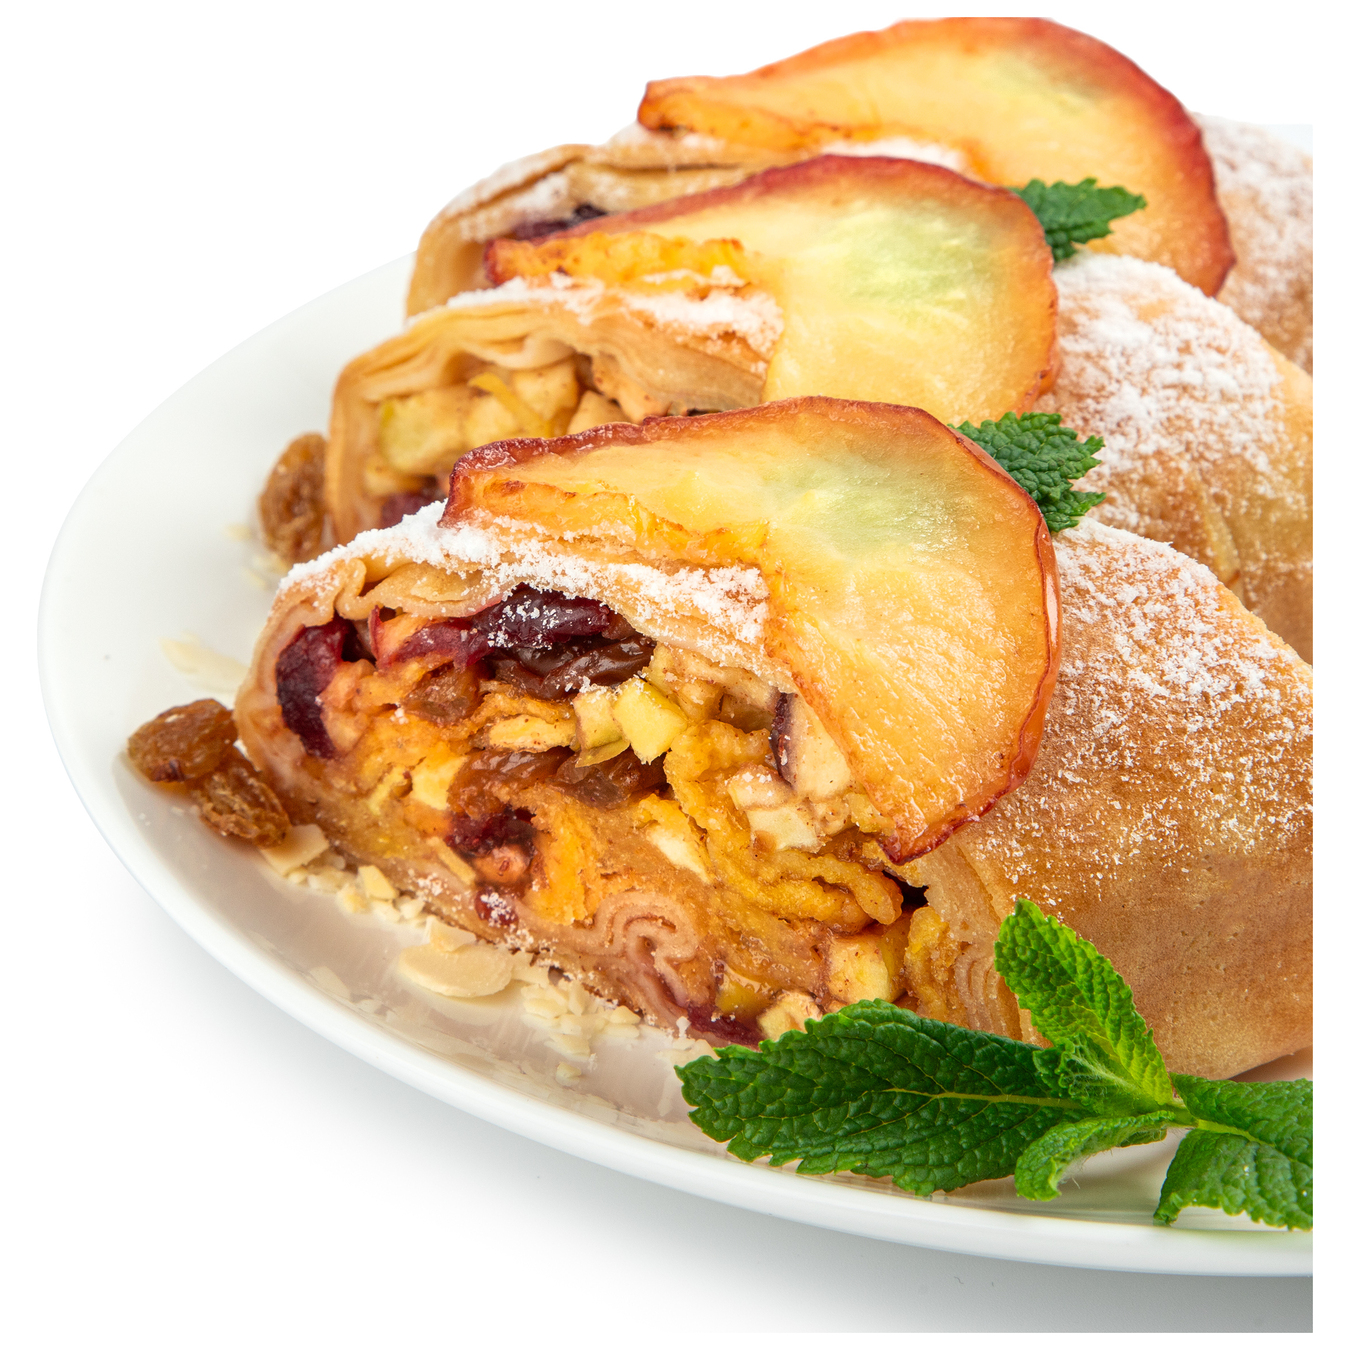 Pancake strudel with apples